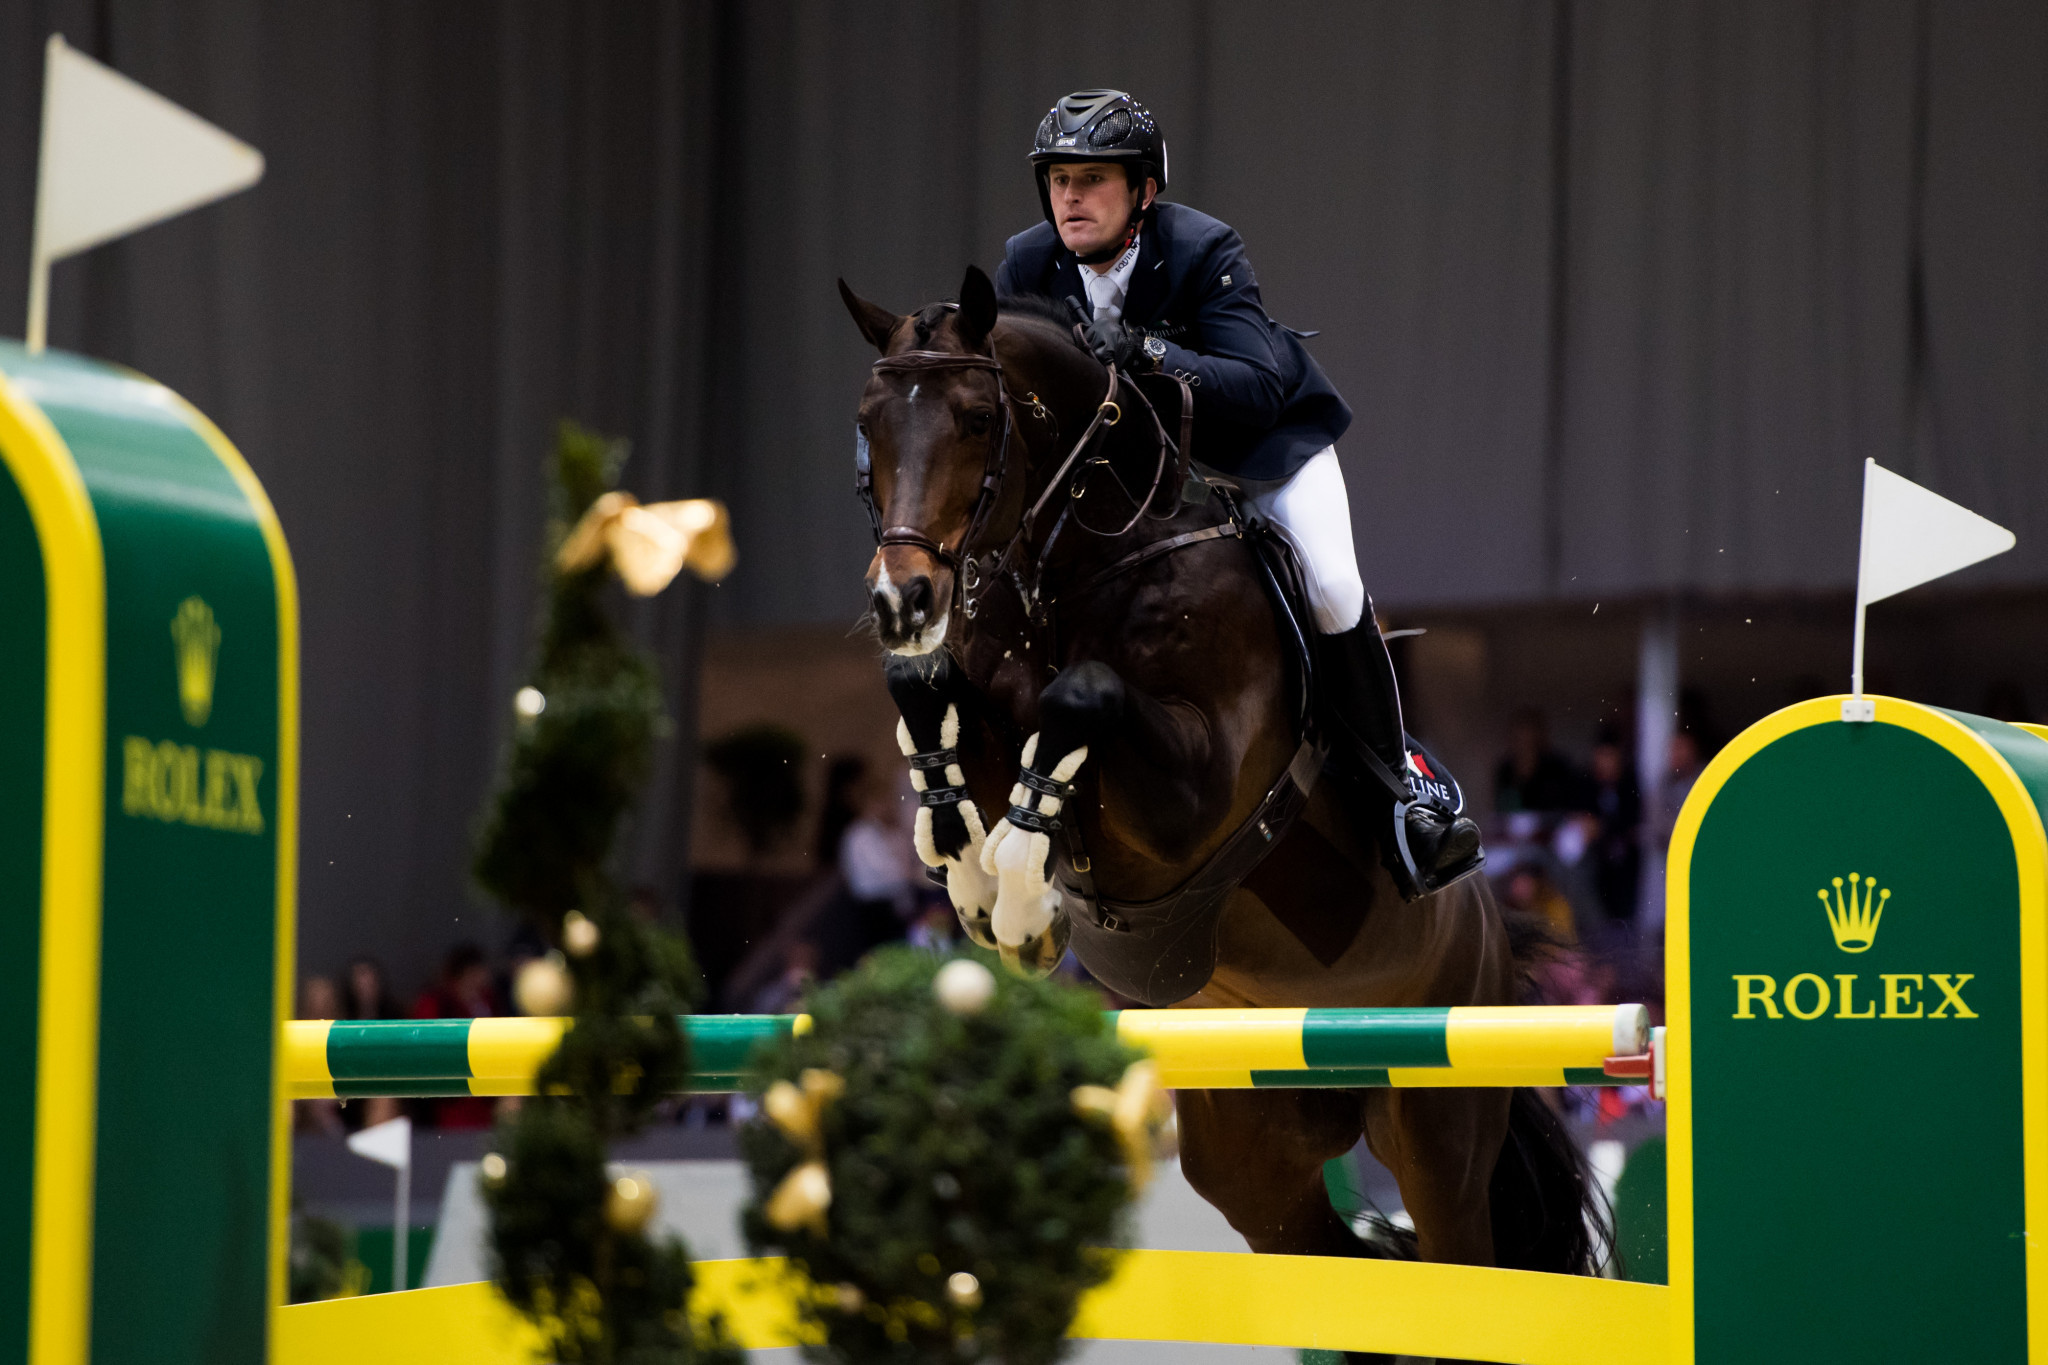 Ireland's Kenny claims jumping win at World Equestrian Festival in Aachen